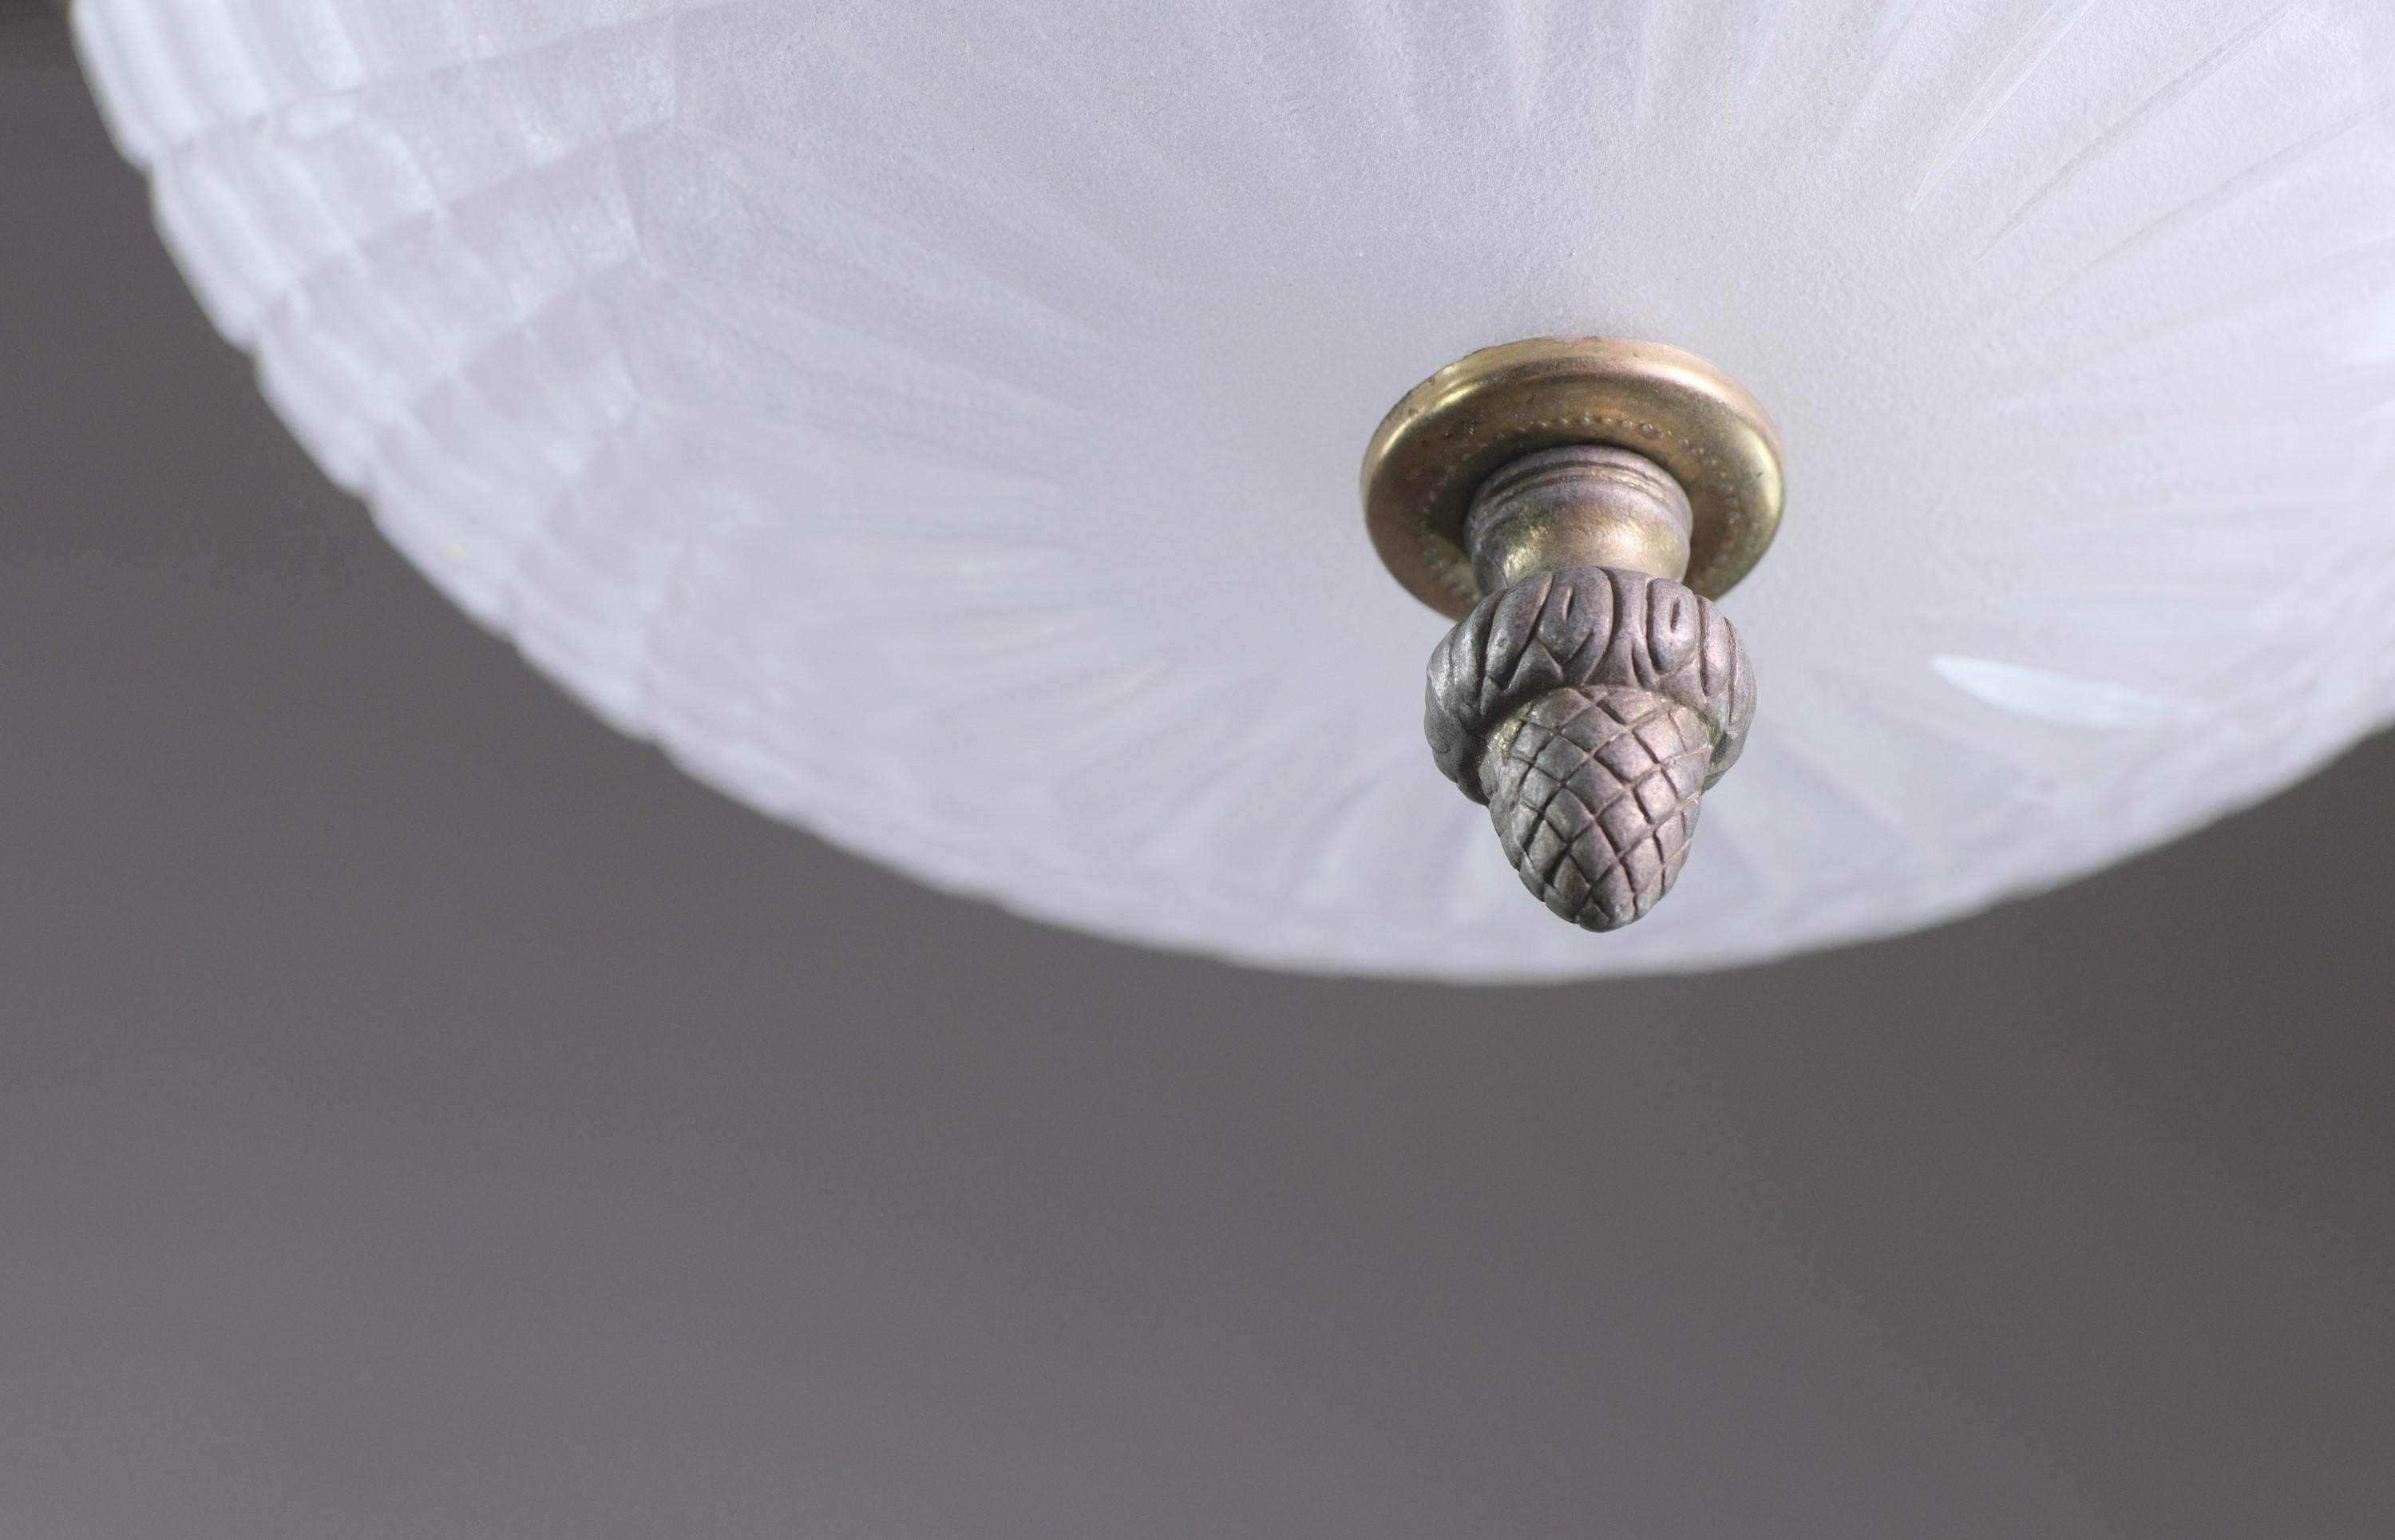 Brass Waldorf Astoria Hotel Frosted Cut Glass Flush Mount Light with Acorn Finial For Sale